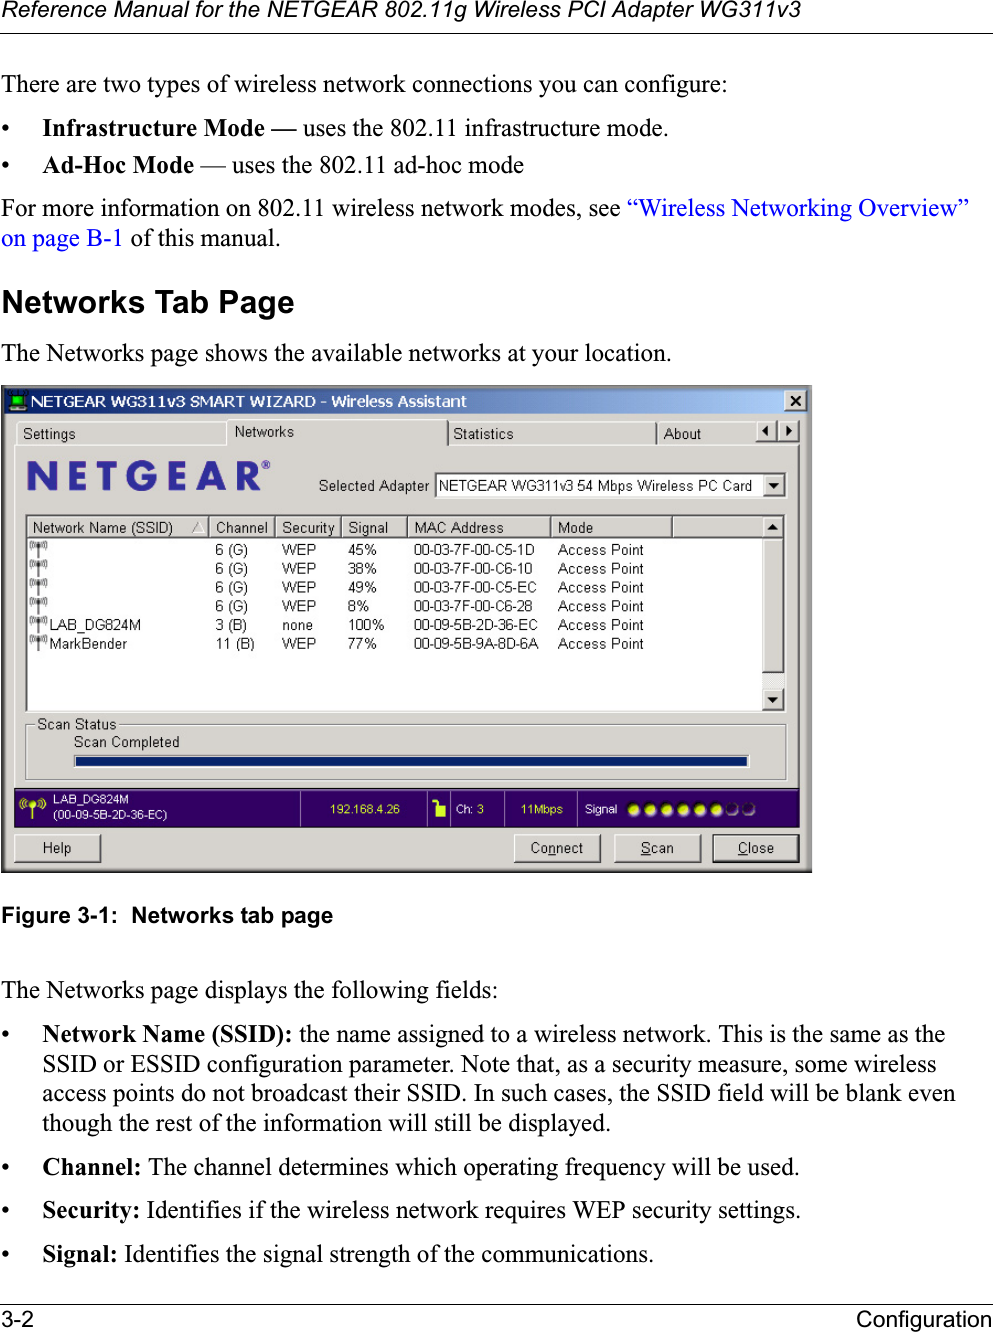 Reference Manual for the NETGEAR 802.11g Wireless PCI Adapter WG311v33-2 ConfigurationThere are two types of wireless network connections you can configure:•Infrastructure Mode — uses the 802.11 infrastructure mode.•Ad-Hoc Mode — uses the 802.11 ad-hoc modeFor more information on 802.11 wireless network modes, see “Wireless Networking Overview” on page B-1 of this manual.Networks Tab PageThe Networks page shows the available networks at your location.Figure 3-1:  Networks tab pageThe Networks page displays the following fields:•Network Name (SSID): the name assigned to a wireless network. This is the same as the SSID or ESSID configuration parameter. Note that, as a security measure, some wireless access points do not broadcast their SSID. In such cases, the SSID field will be blank even though the rest of the information will still be displayed. •Channel: The channel determines which operating frequency will be used. •Security: Identifies if the wireless network requires WEP security settings.•Signal: Identifies the signal strength of the communications.